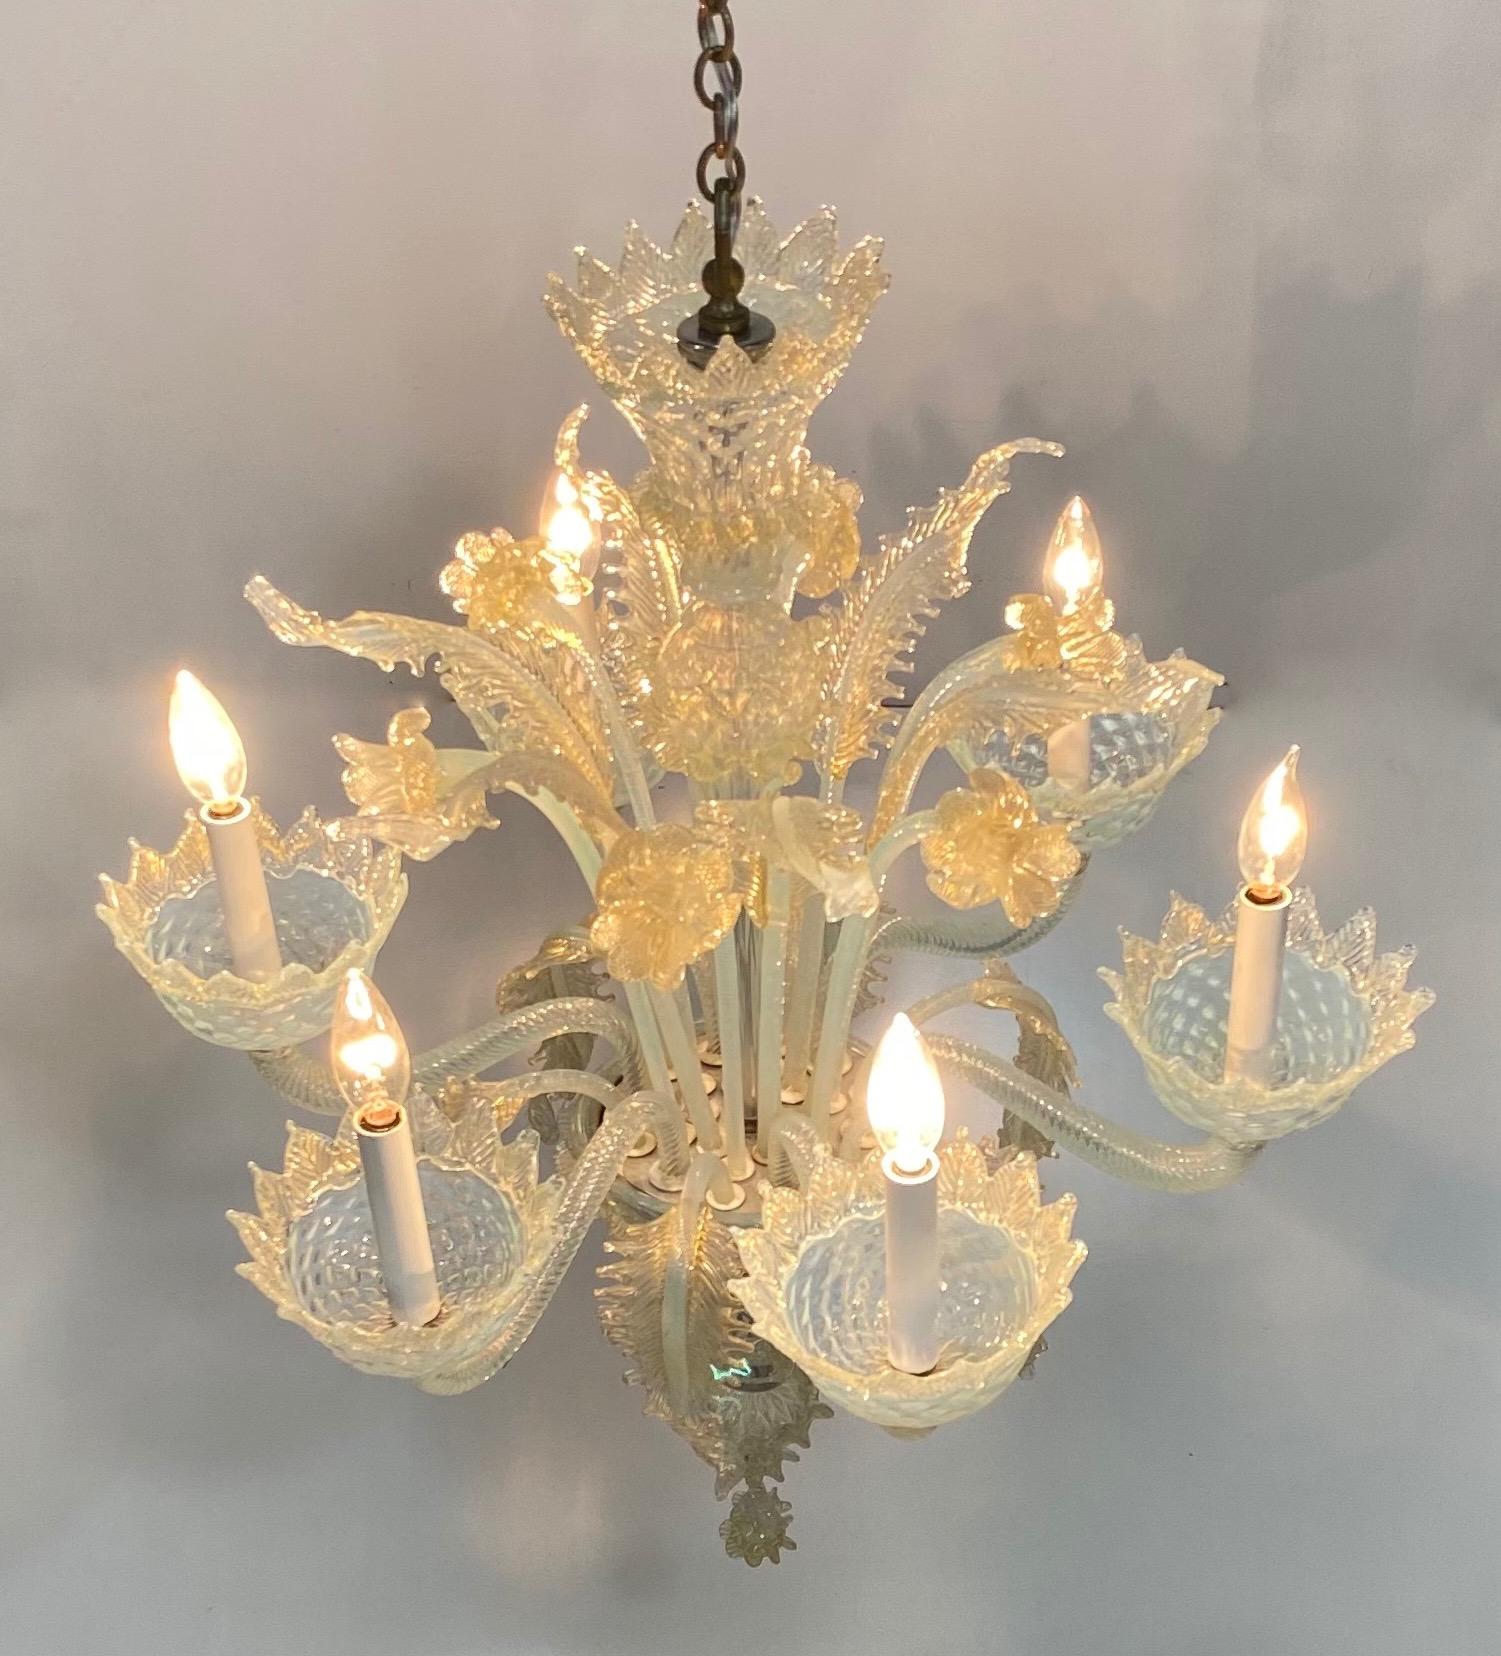 An exceptional large scale opaline color Murano glass chandelier.
Completely cleaned and re-wired.
A few glass fronds have been professionally repaired (not a distraction or noticeable).
Truly stunning, emitting a beautiful and welcoming glow